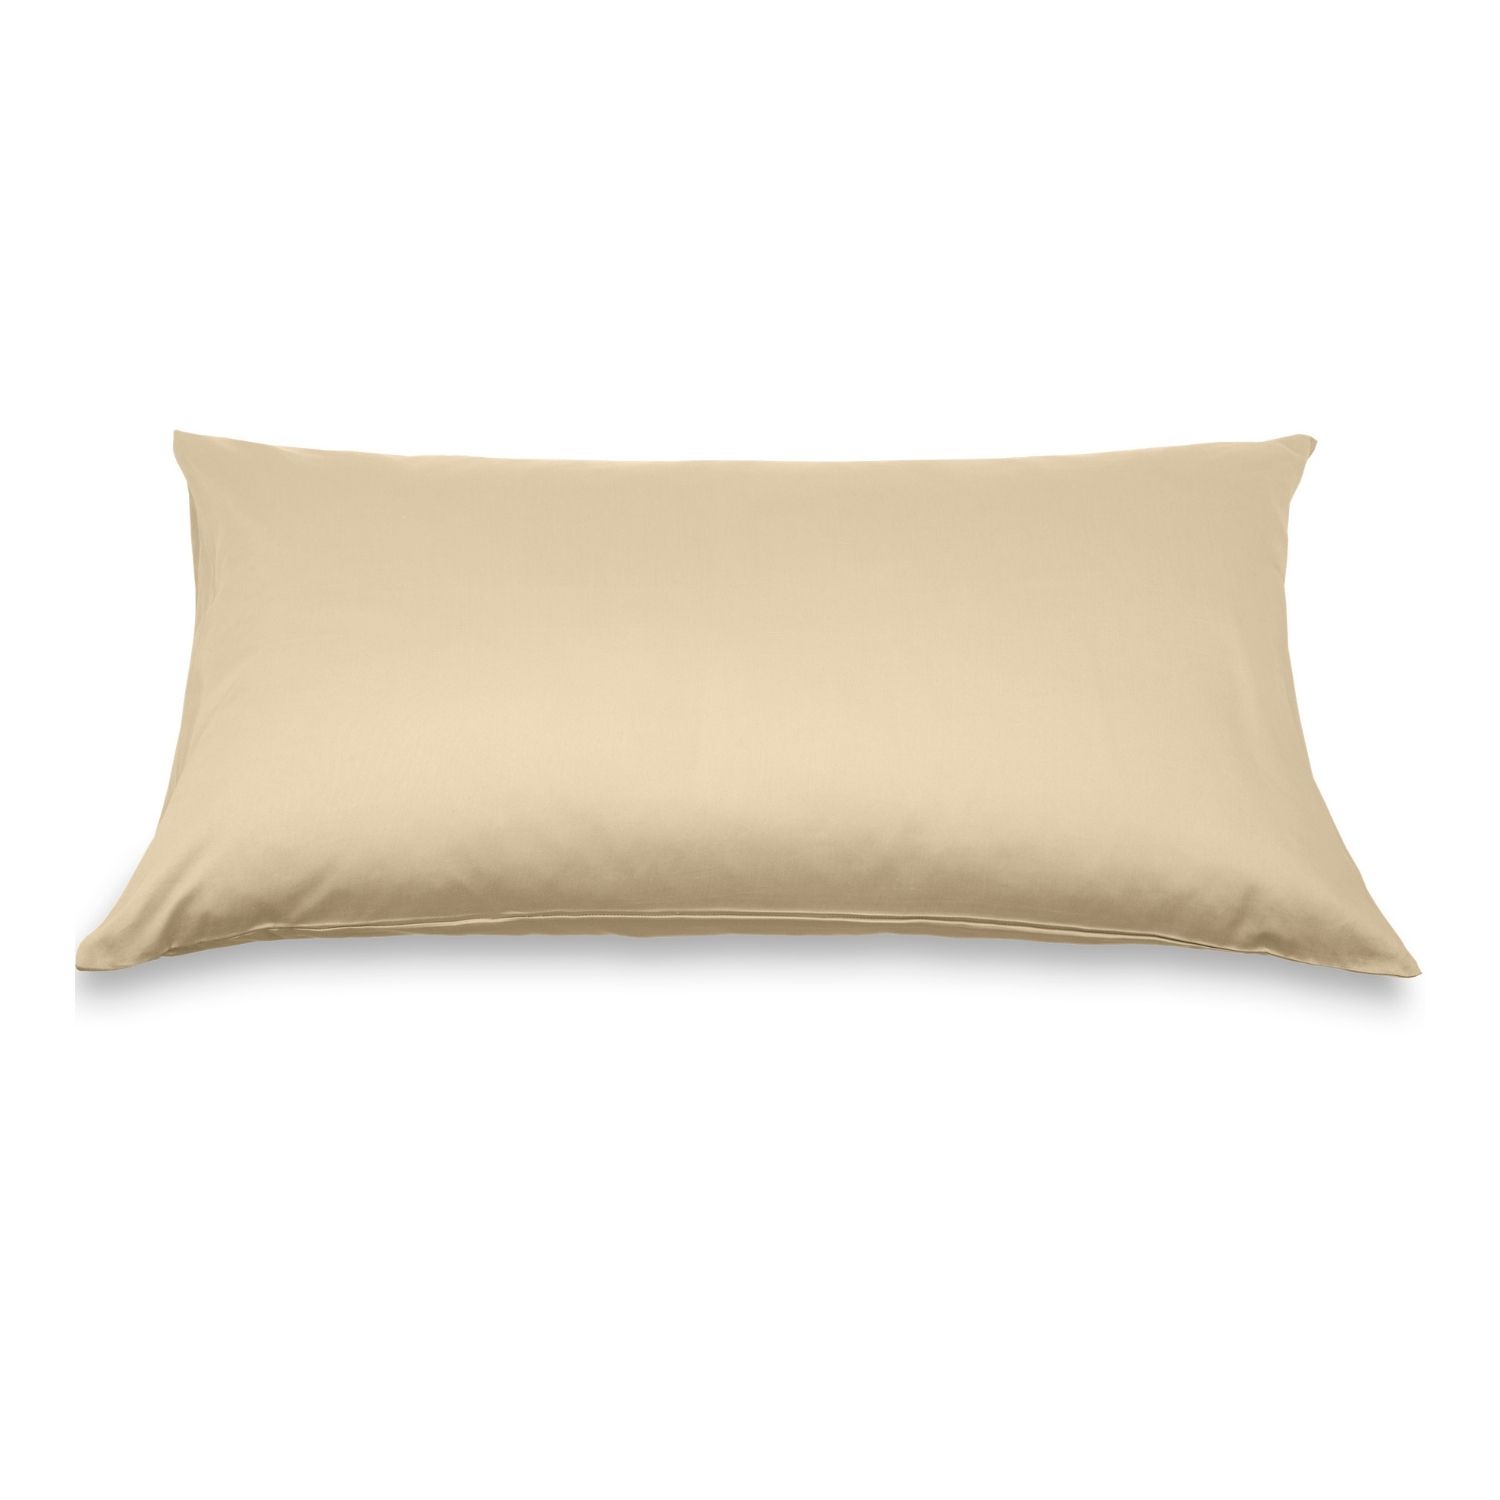 Oasi Deluxe Pillow Cover